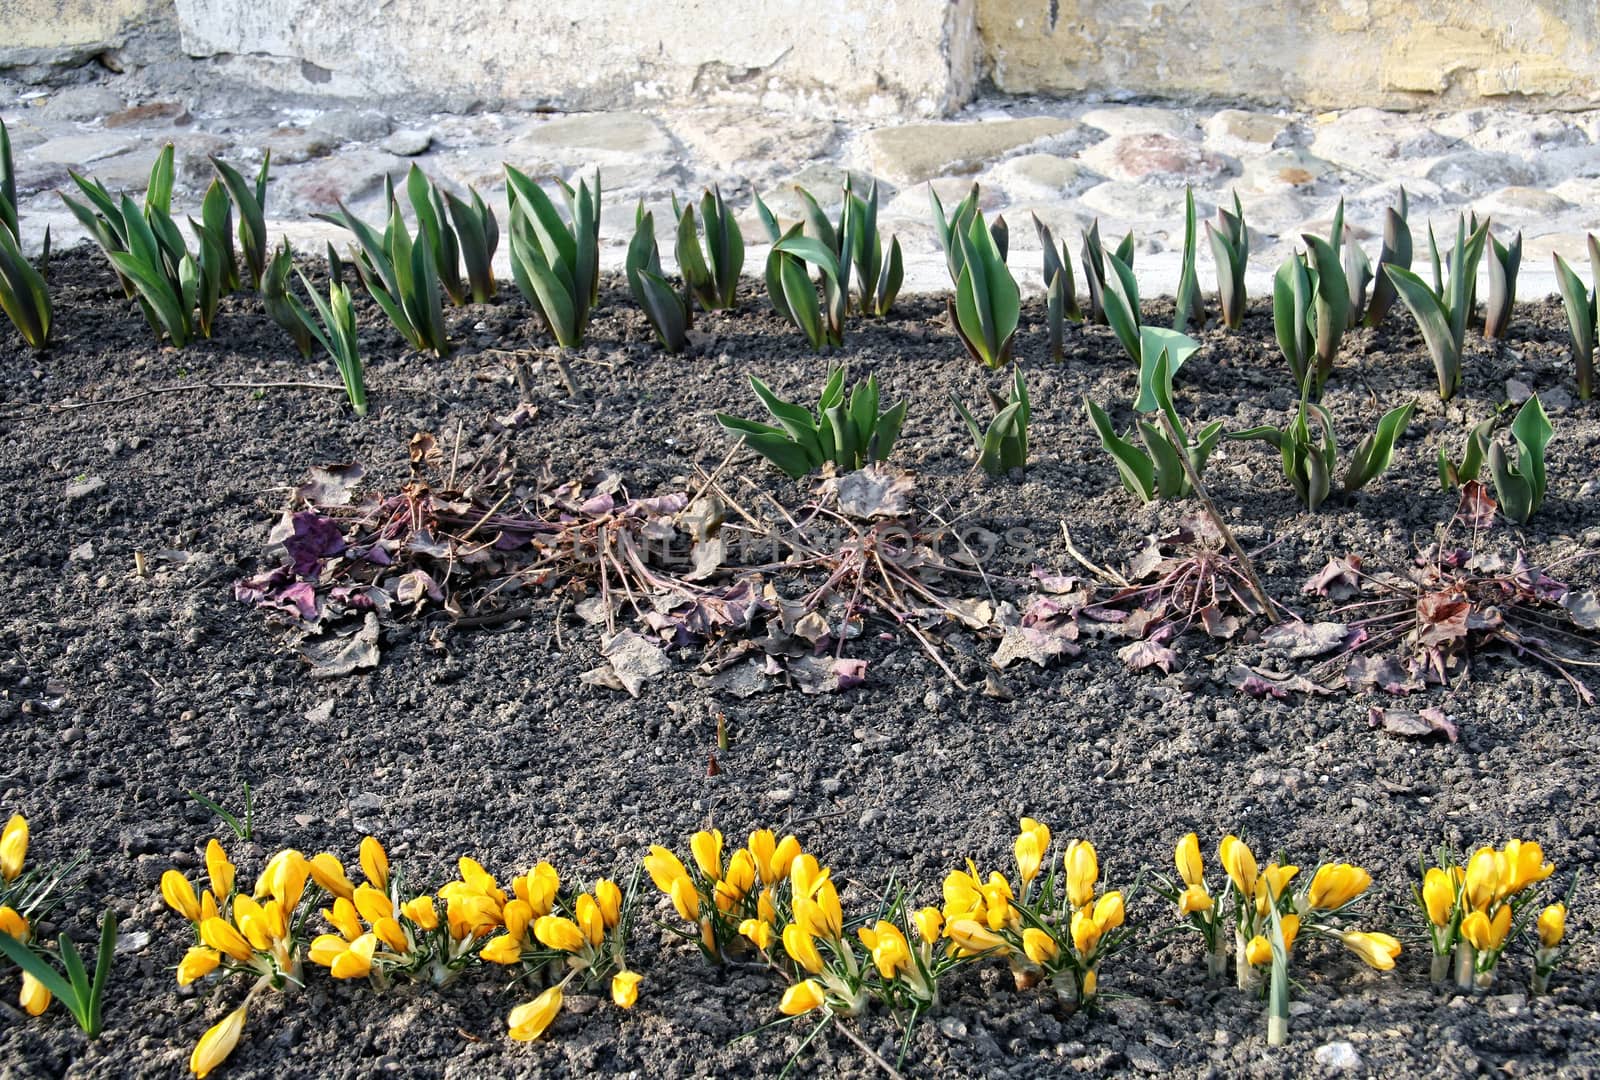 The first days of spring, the awakening of nature after winter. The earliest spring flowers are crocuses that bloom in the garden after snow melts.